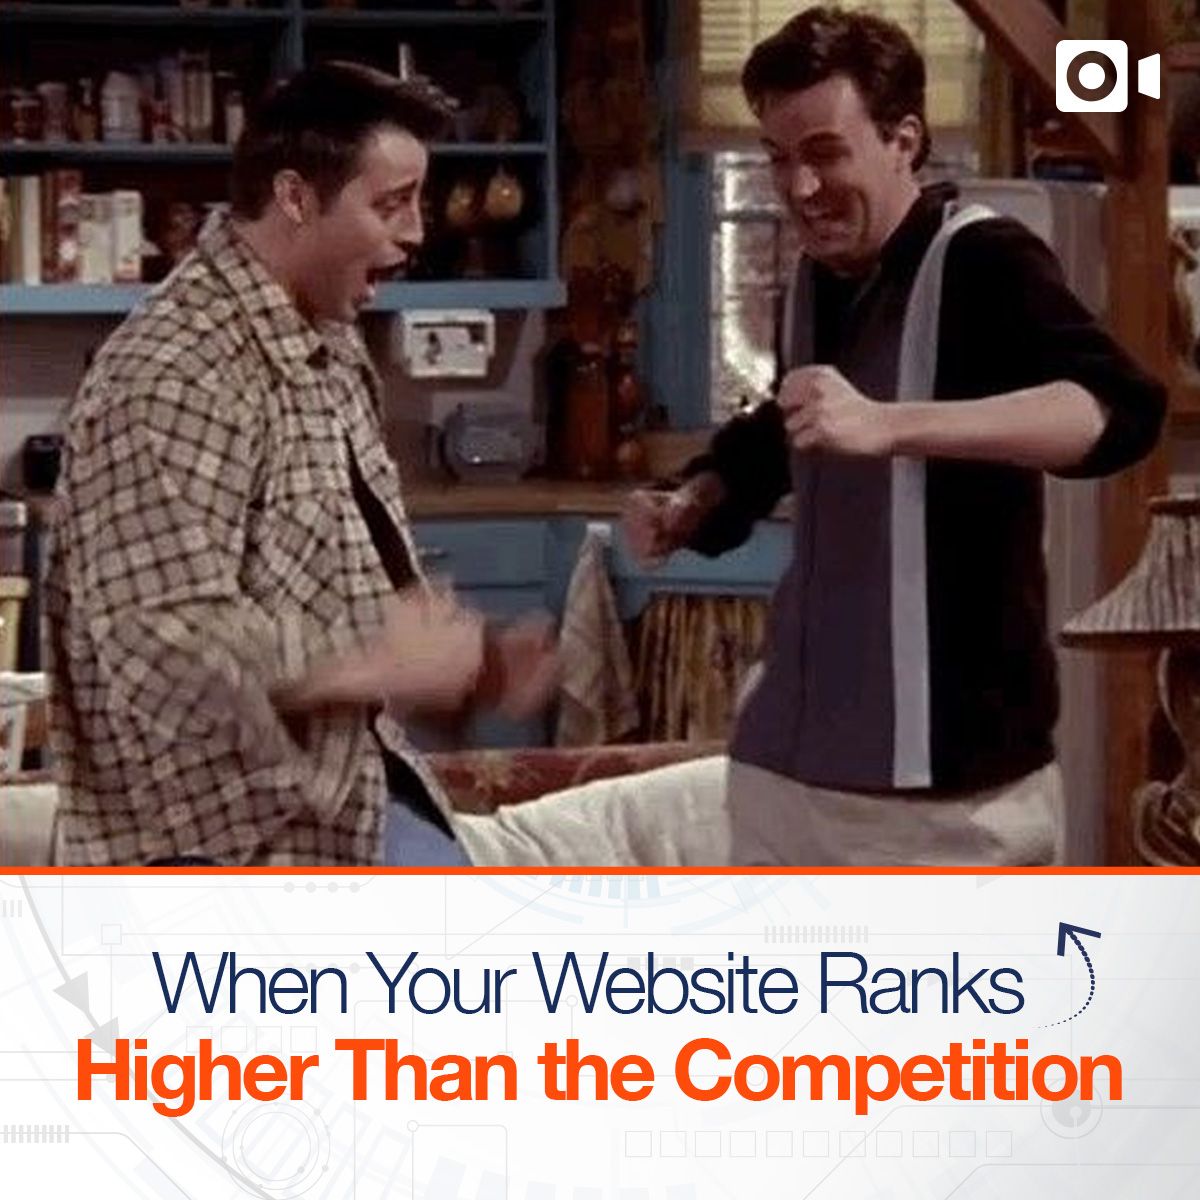 When Your Website Ranks Higher Than the Competition